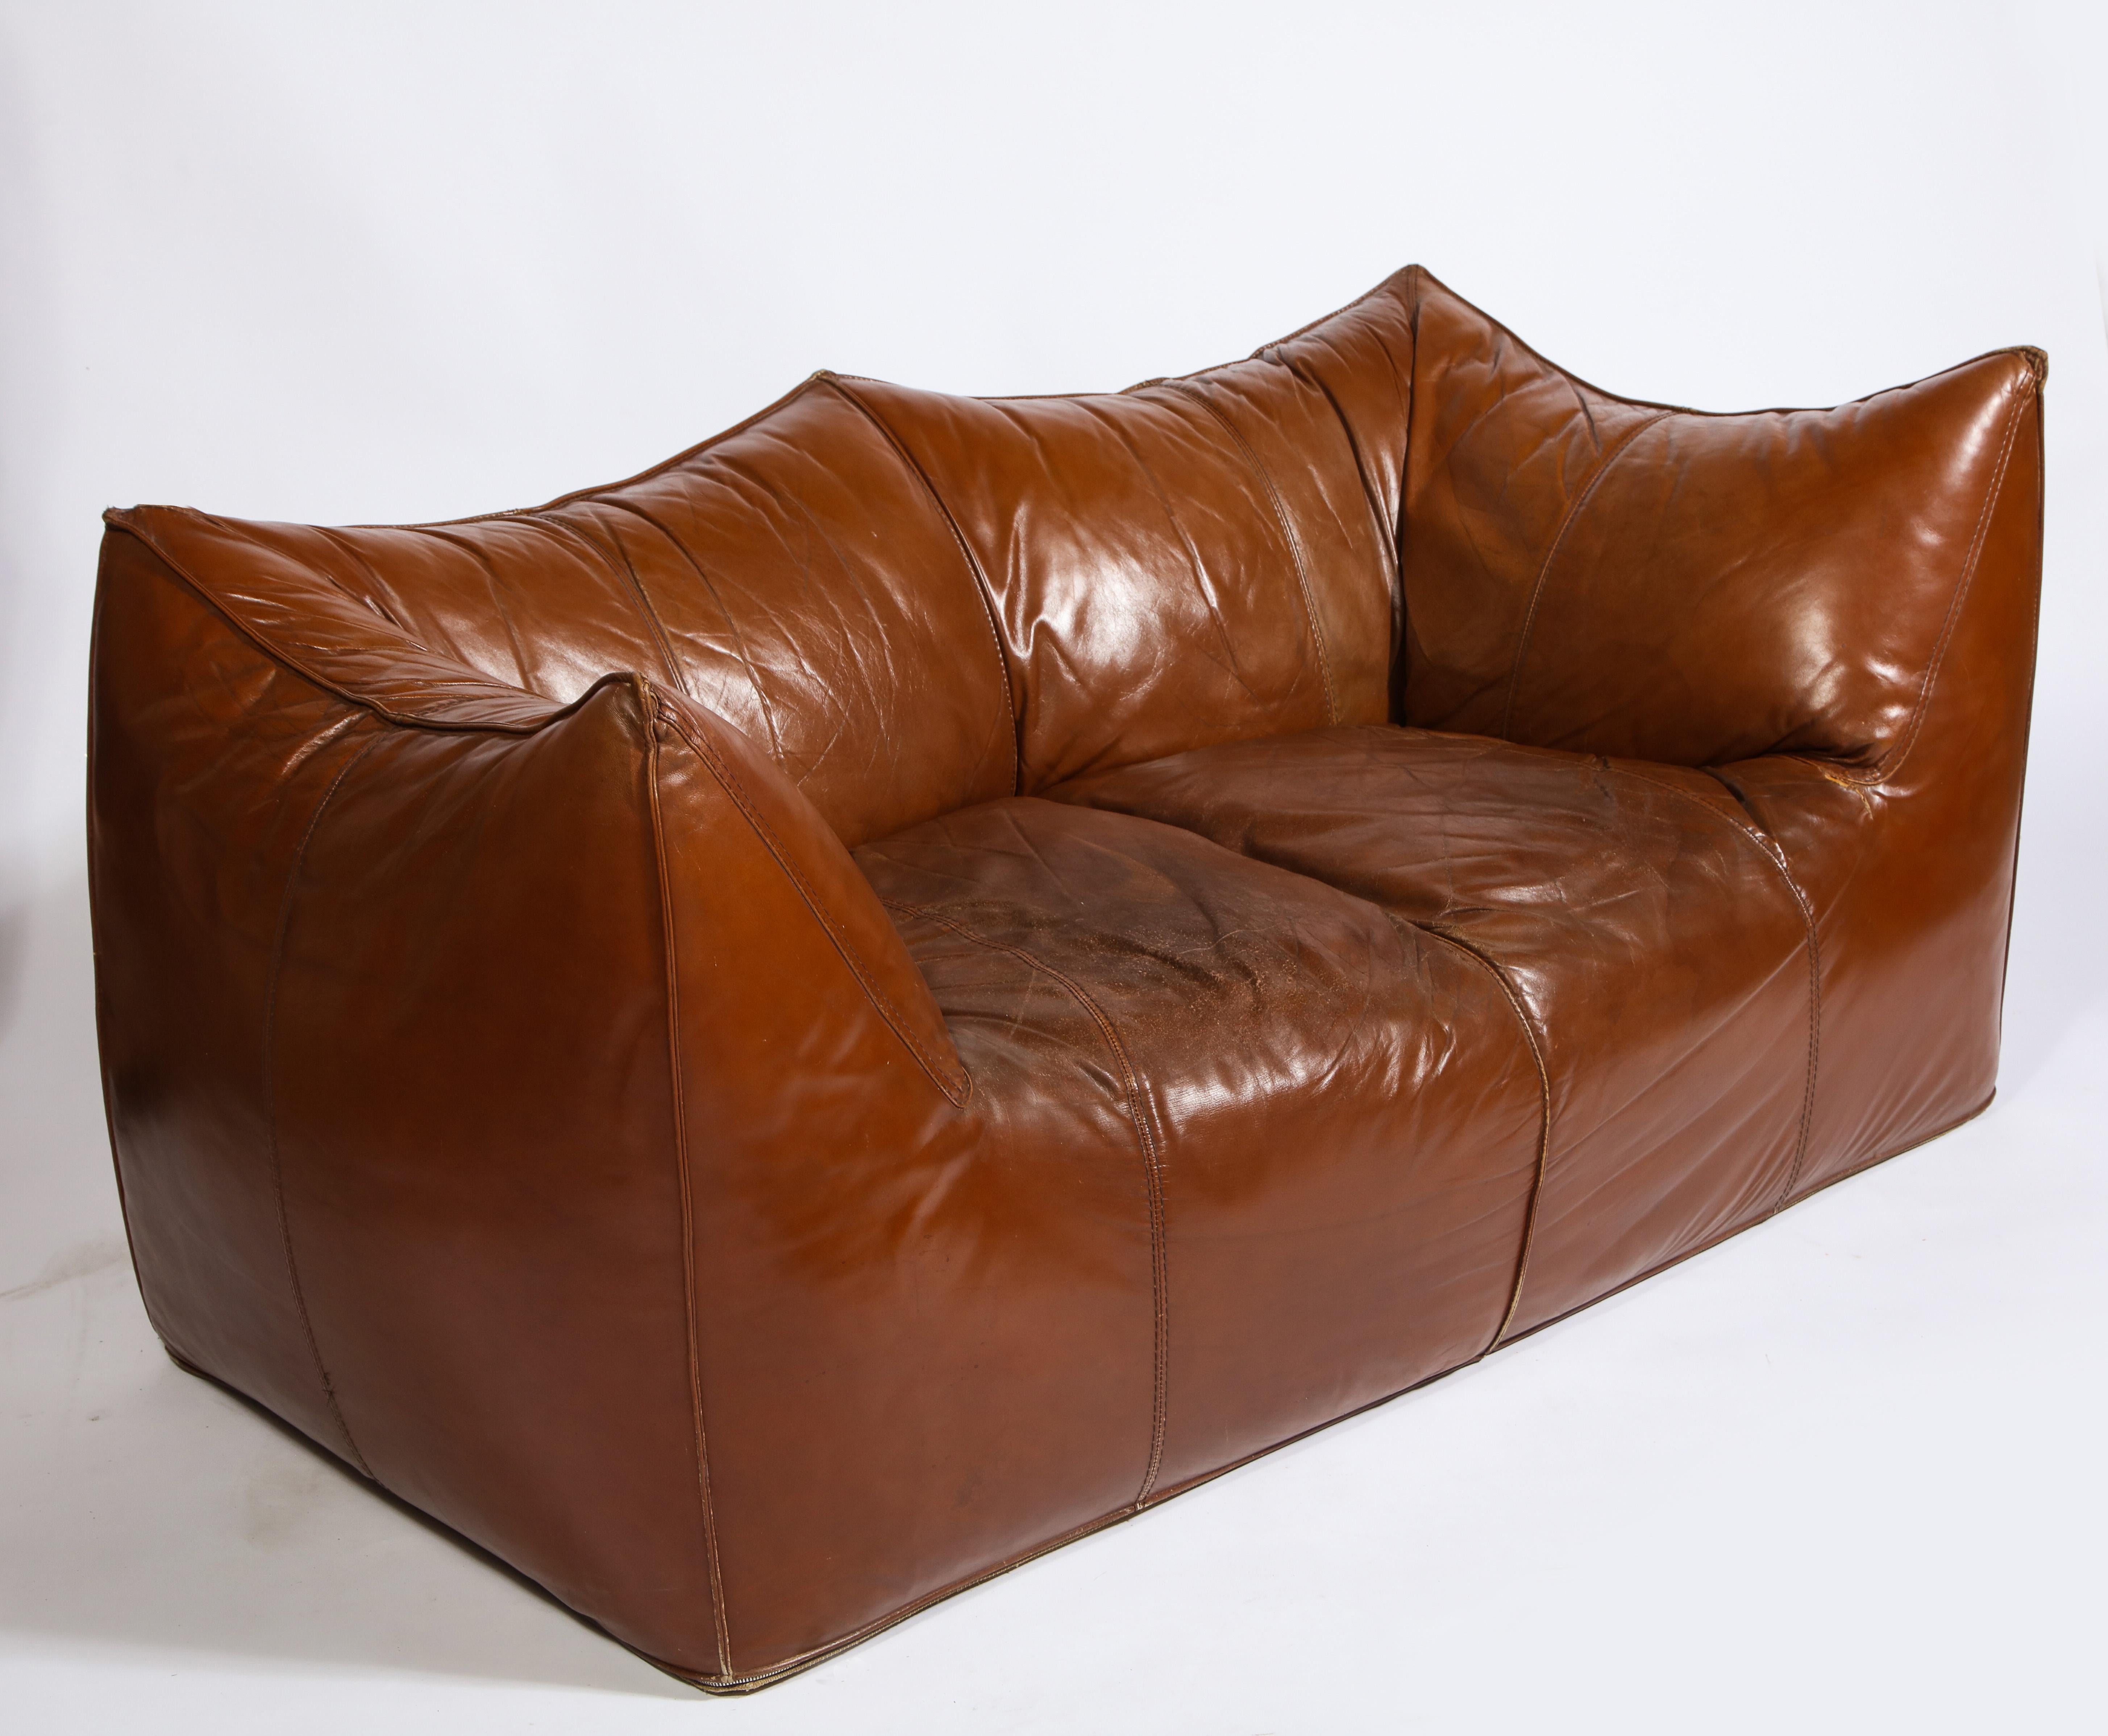 Mario Bellini Cognac brown leather sofa, chair, ottoman Bambole set, Italy. 

Sofa set, beautiful deep cognac color. Beautiful vintage condition, Italy, 1970s.

Measures: Sofa
30 inches high
63 inches wide
31 inches deep
15 inches seat